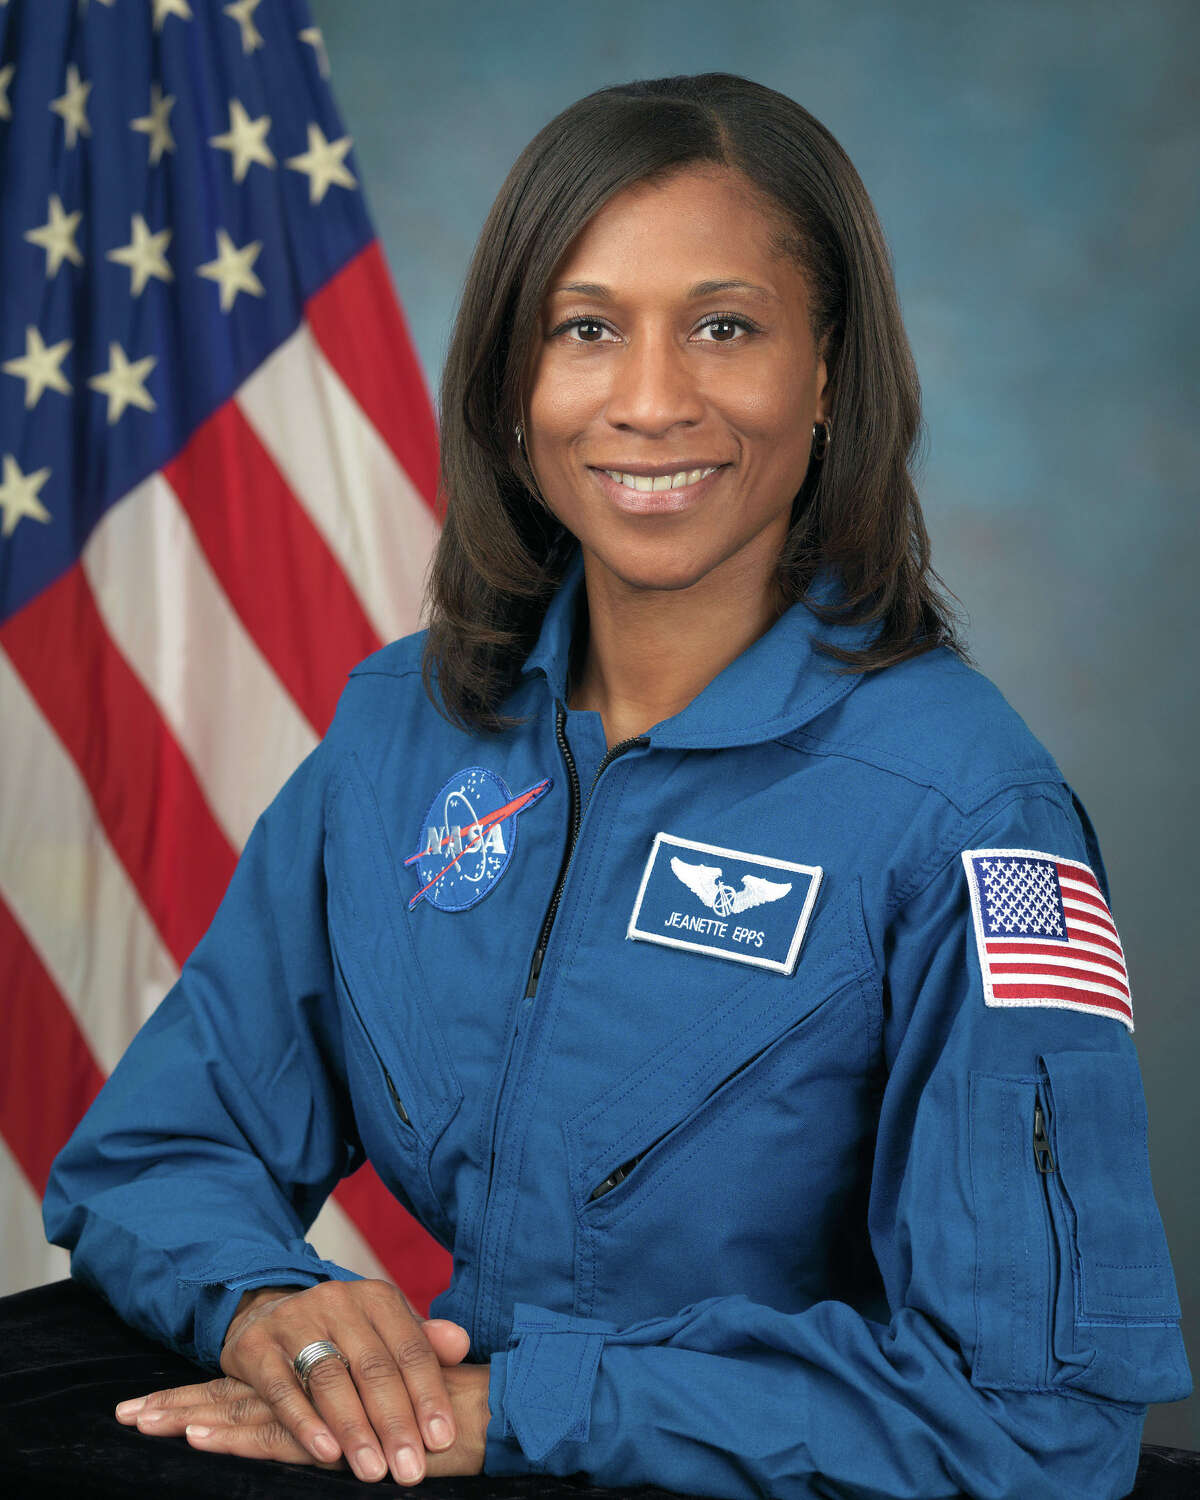 NASA astronaut Jeanette Epps was on track to become the first African-American crew member on the International Space Station this year, but the space agency announced today that she has been pulled from her mission for unspecified reasons. She was supposed to launch as part of Expedition 56/67 in June 2018.